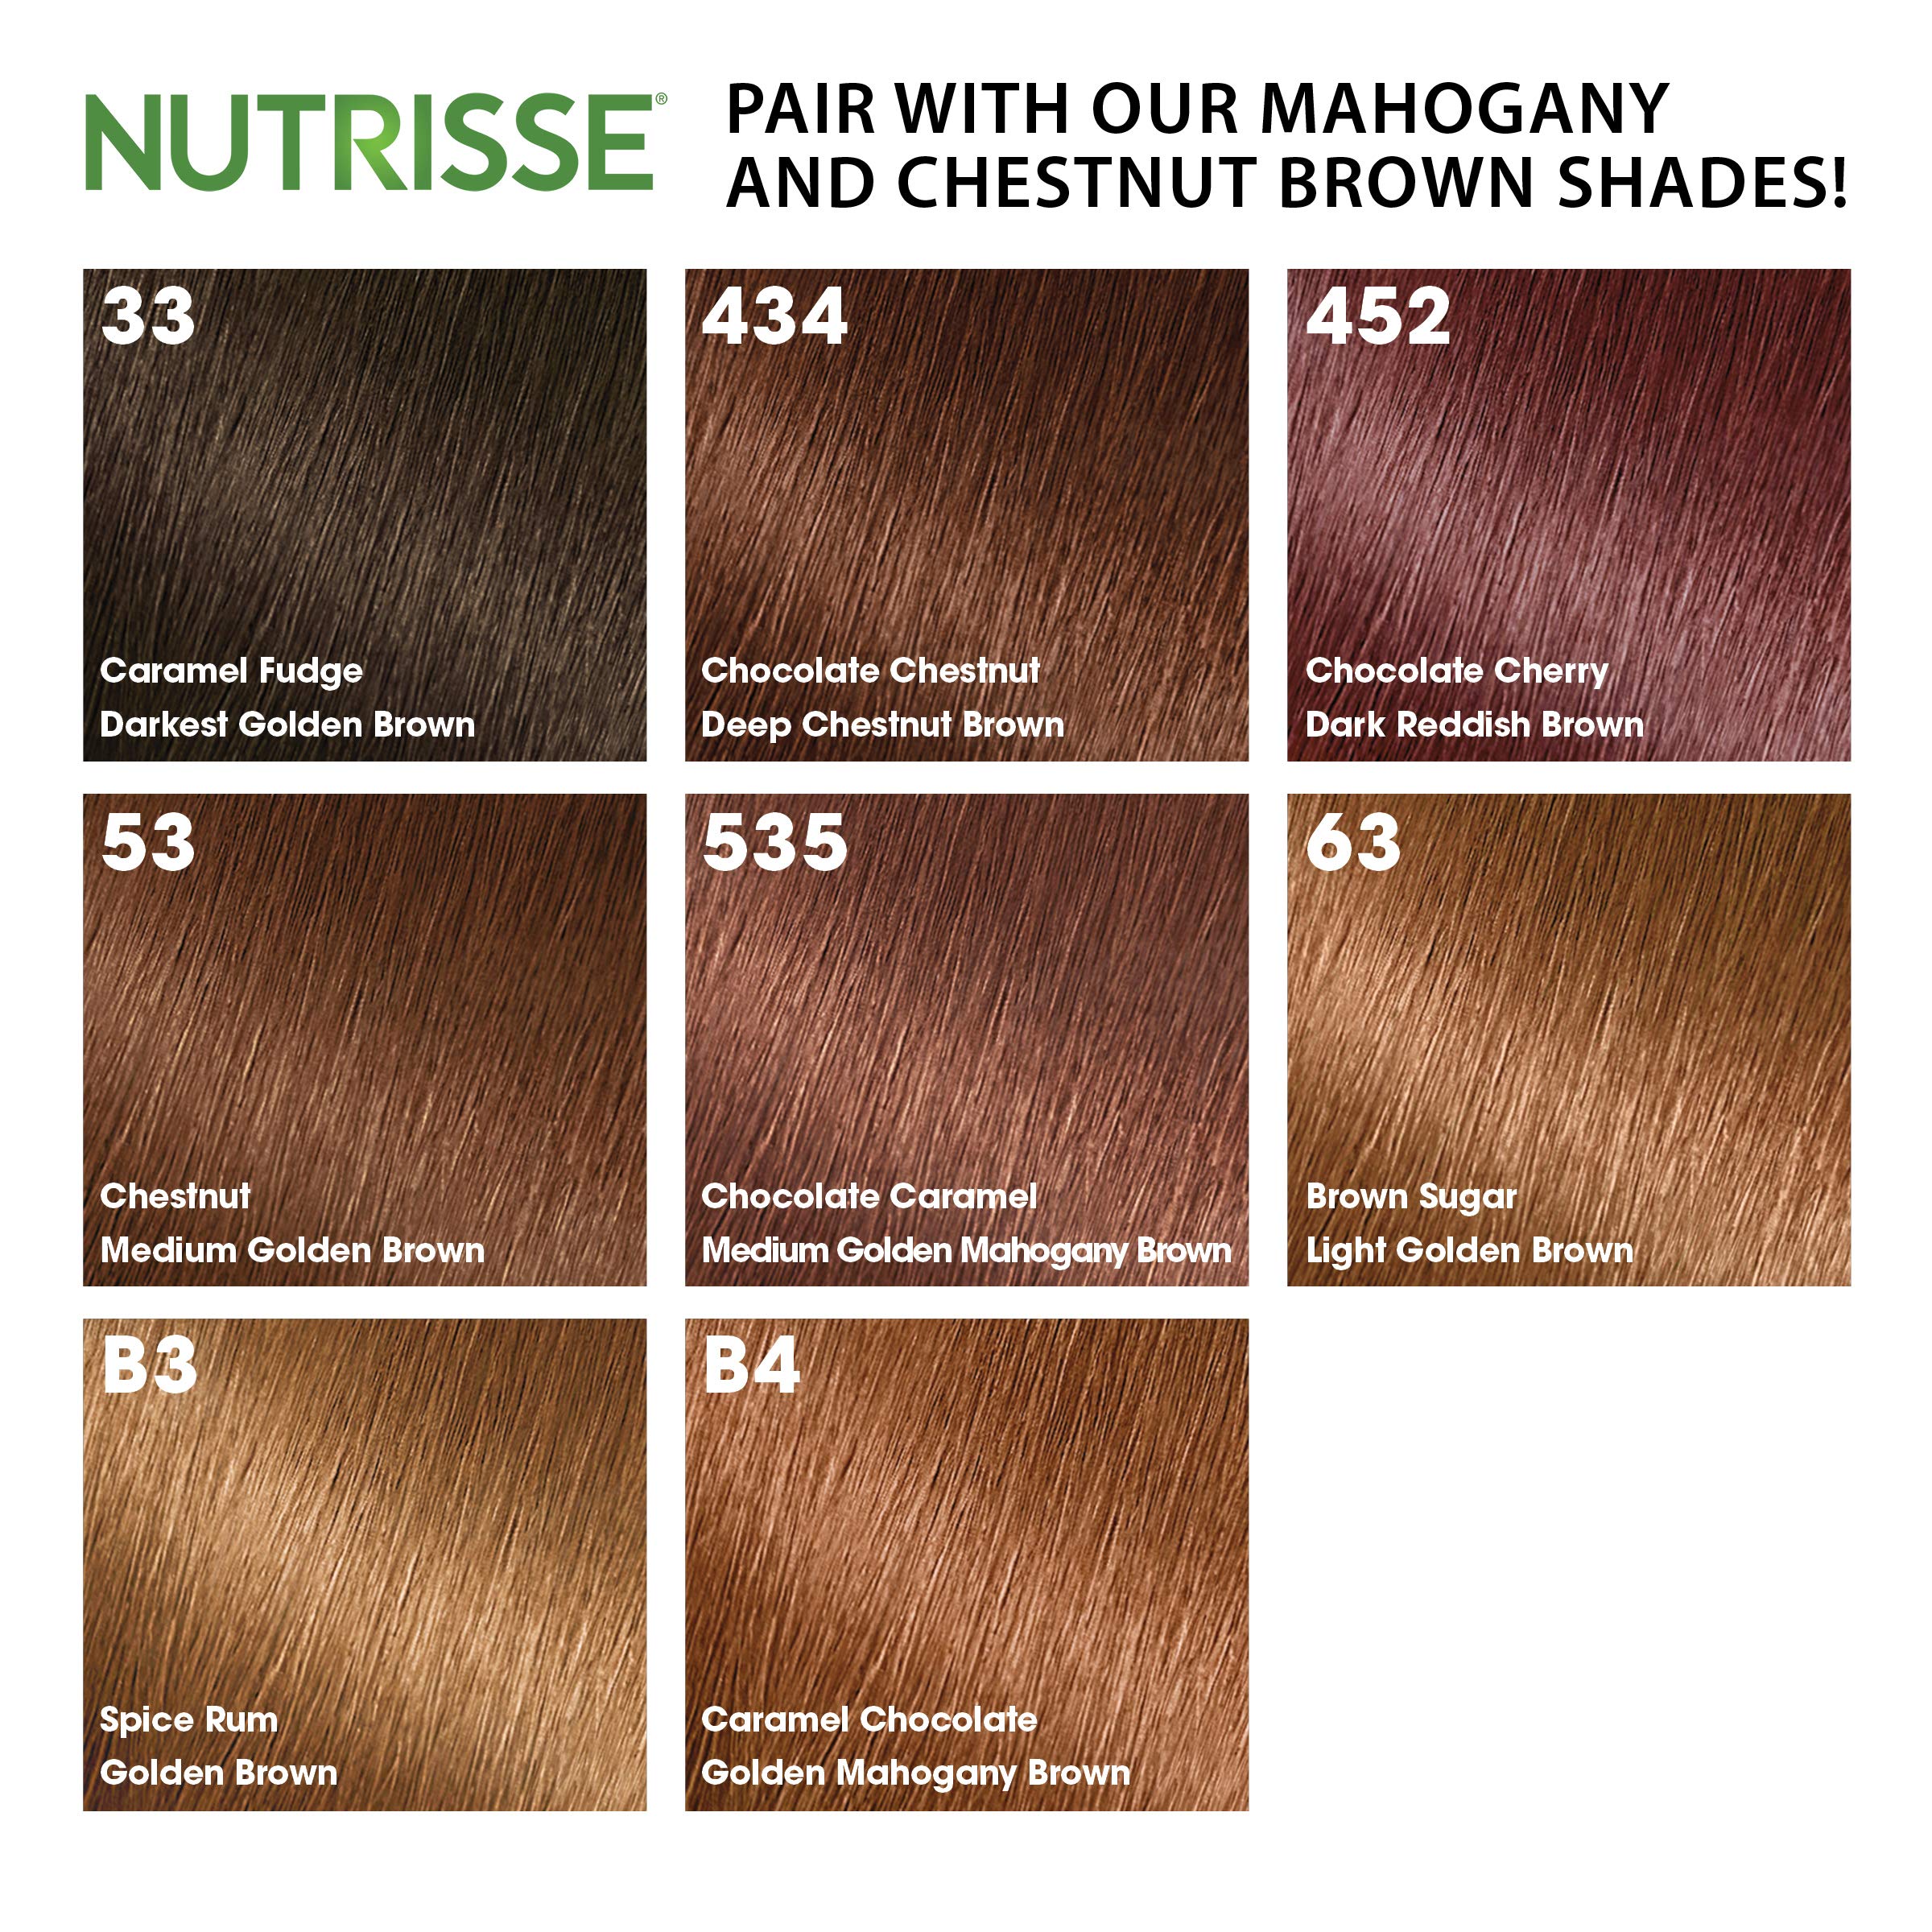 Garnier Nutrisse 5 Minute Nourishing Color Hair Mask with Triple Oils Delivers Day 1 Color Results, for Color Treated Hair, Warm Brown, 4.2 fl. oz.